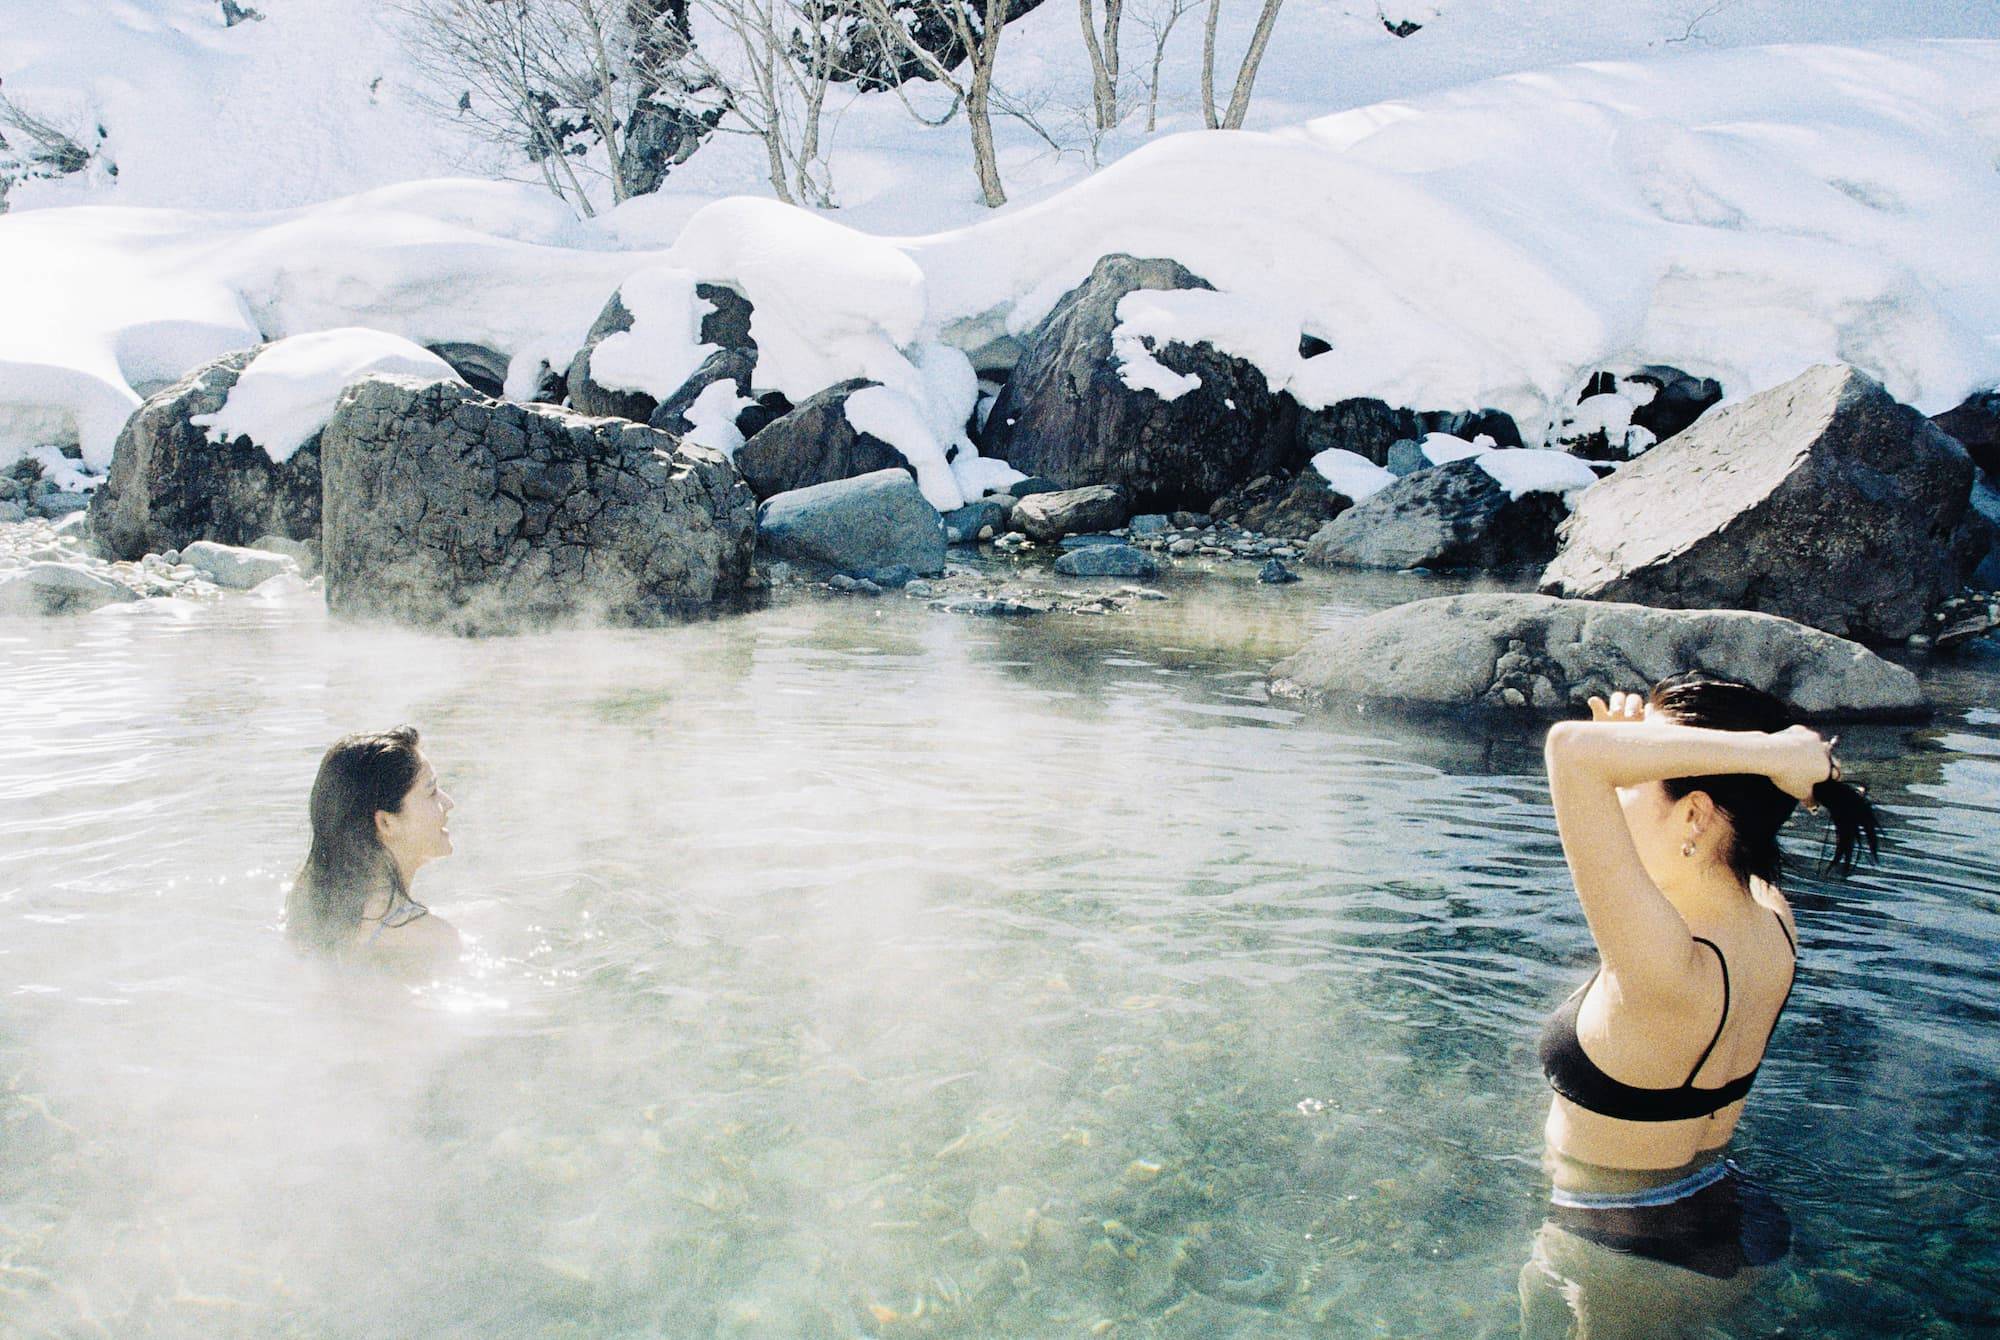 Two slim women soak in a natural hot spring in the winter. Behind them are rocks and trees covered in snow.